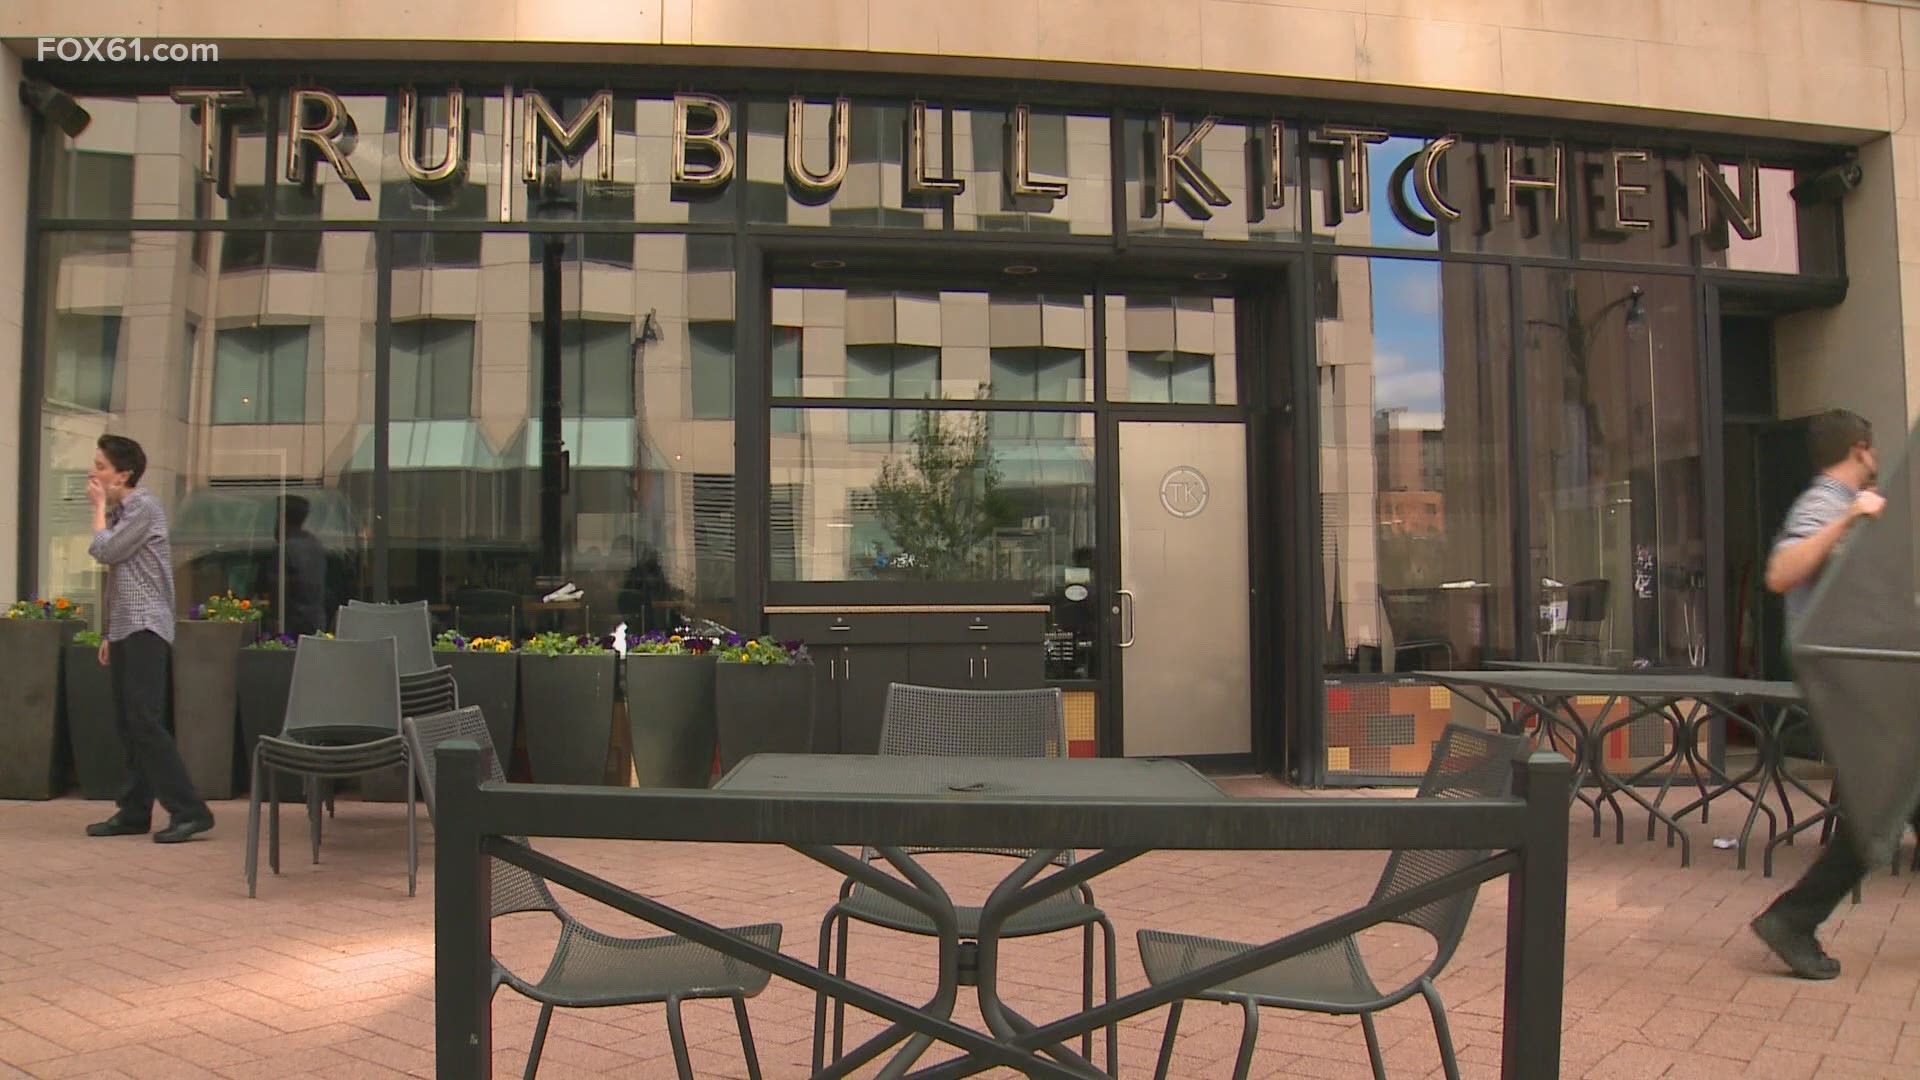 The owner noted that nearly 70 percent of his staff, off from work at the restaurant since closing in December, have returned to Trumbull Kitchen.